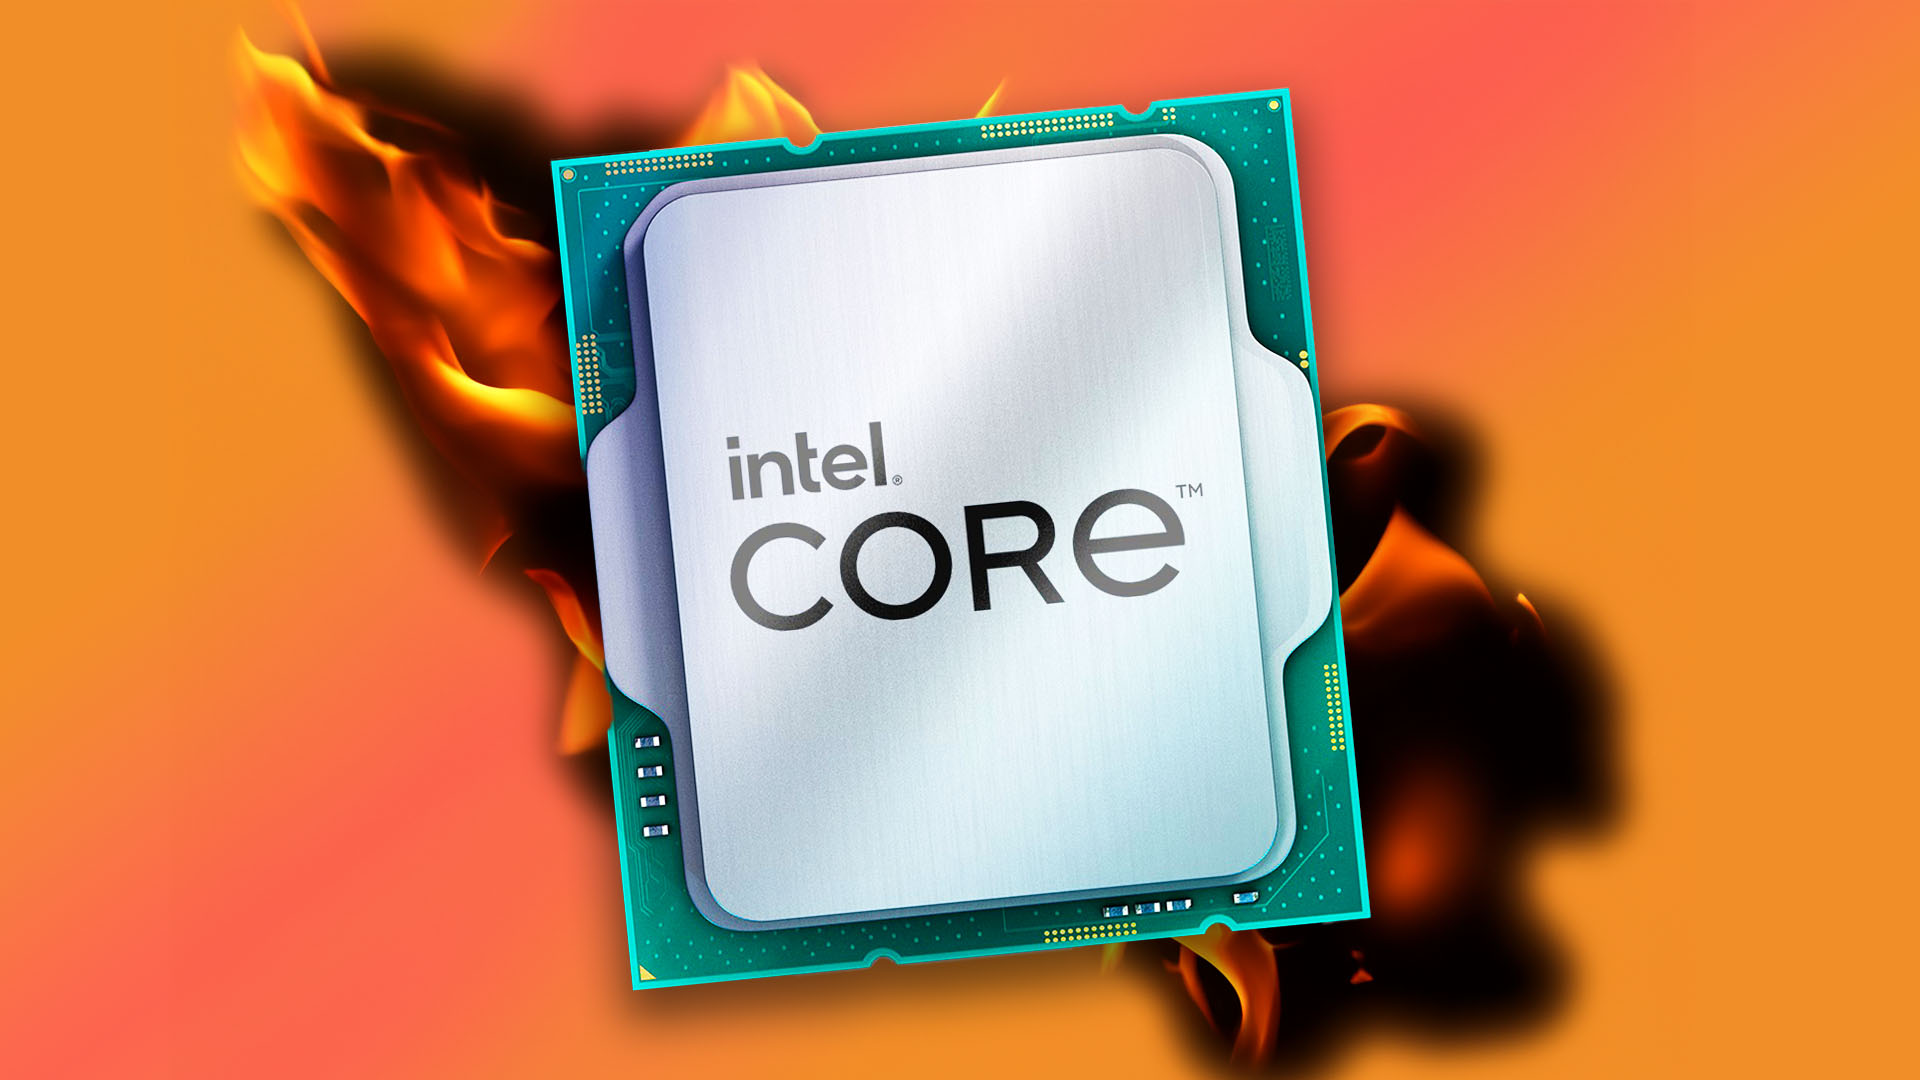 Intel's new flagship CPU reportedly draws over 400W on its own